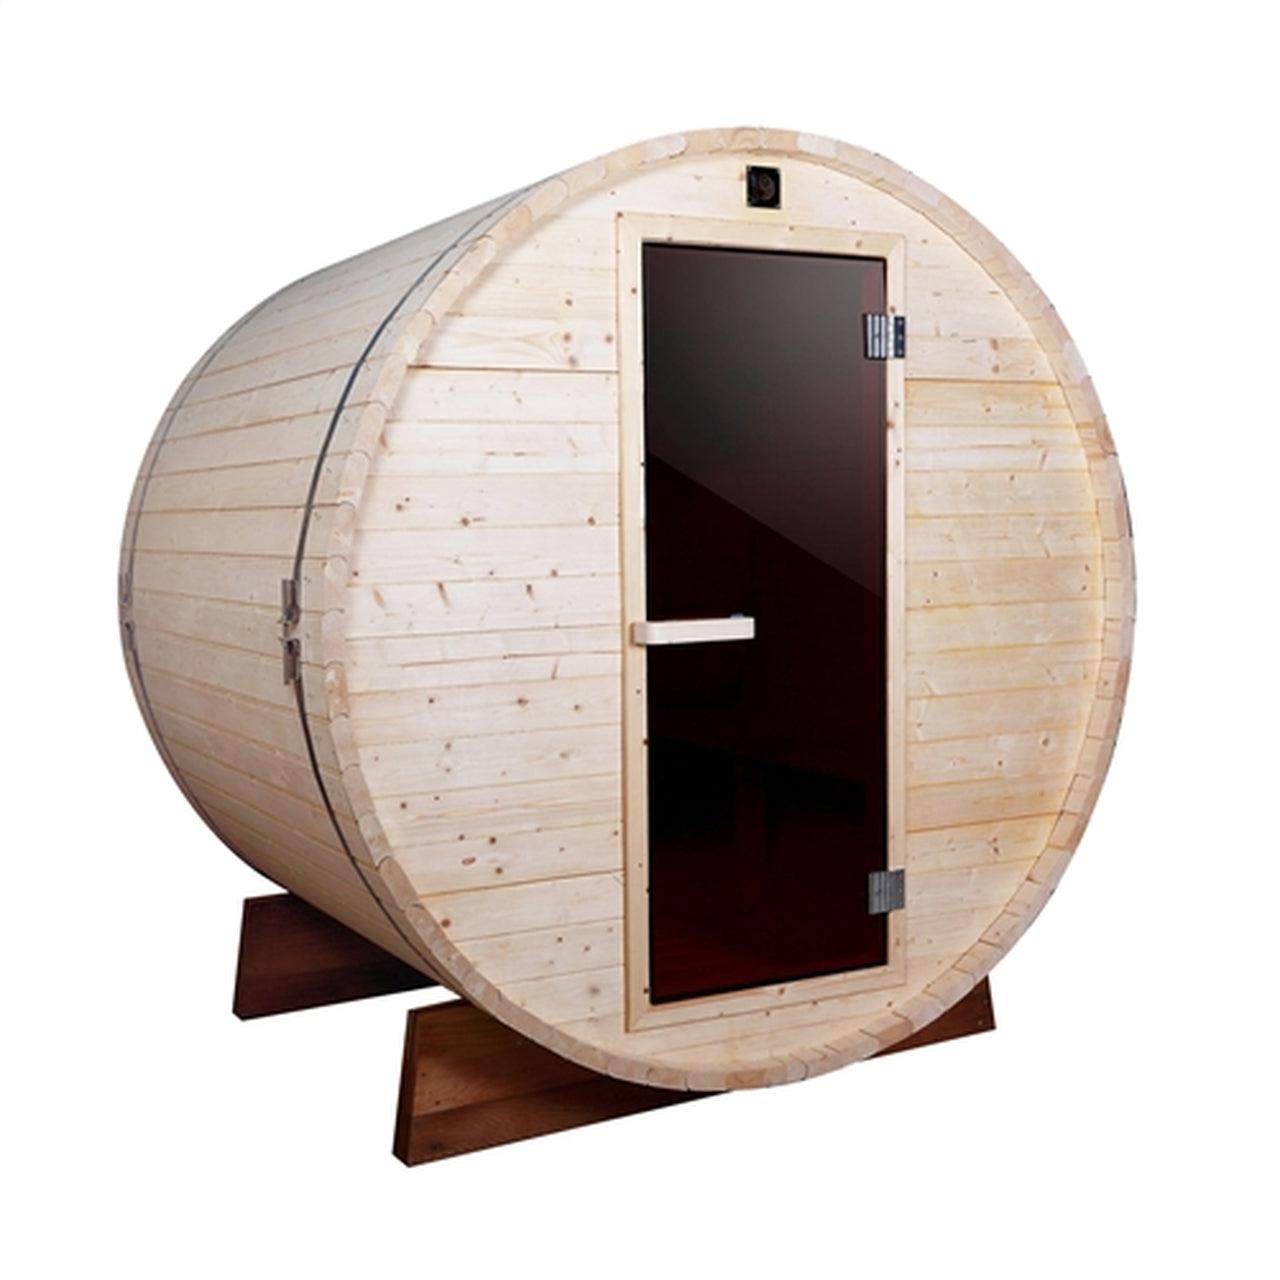 ALEKO Outdoor and Indoor White Pine 4 Person Barrel Sauna With Heater -SB4PINE-AP - Purely Relaxation